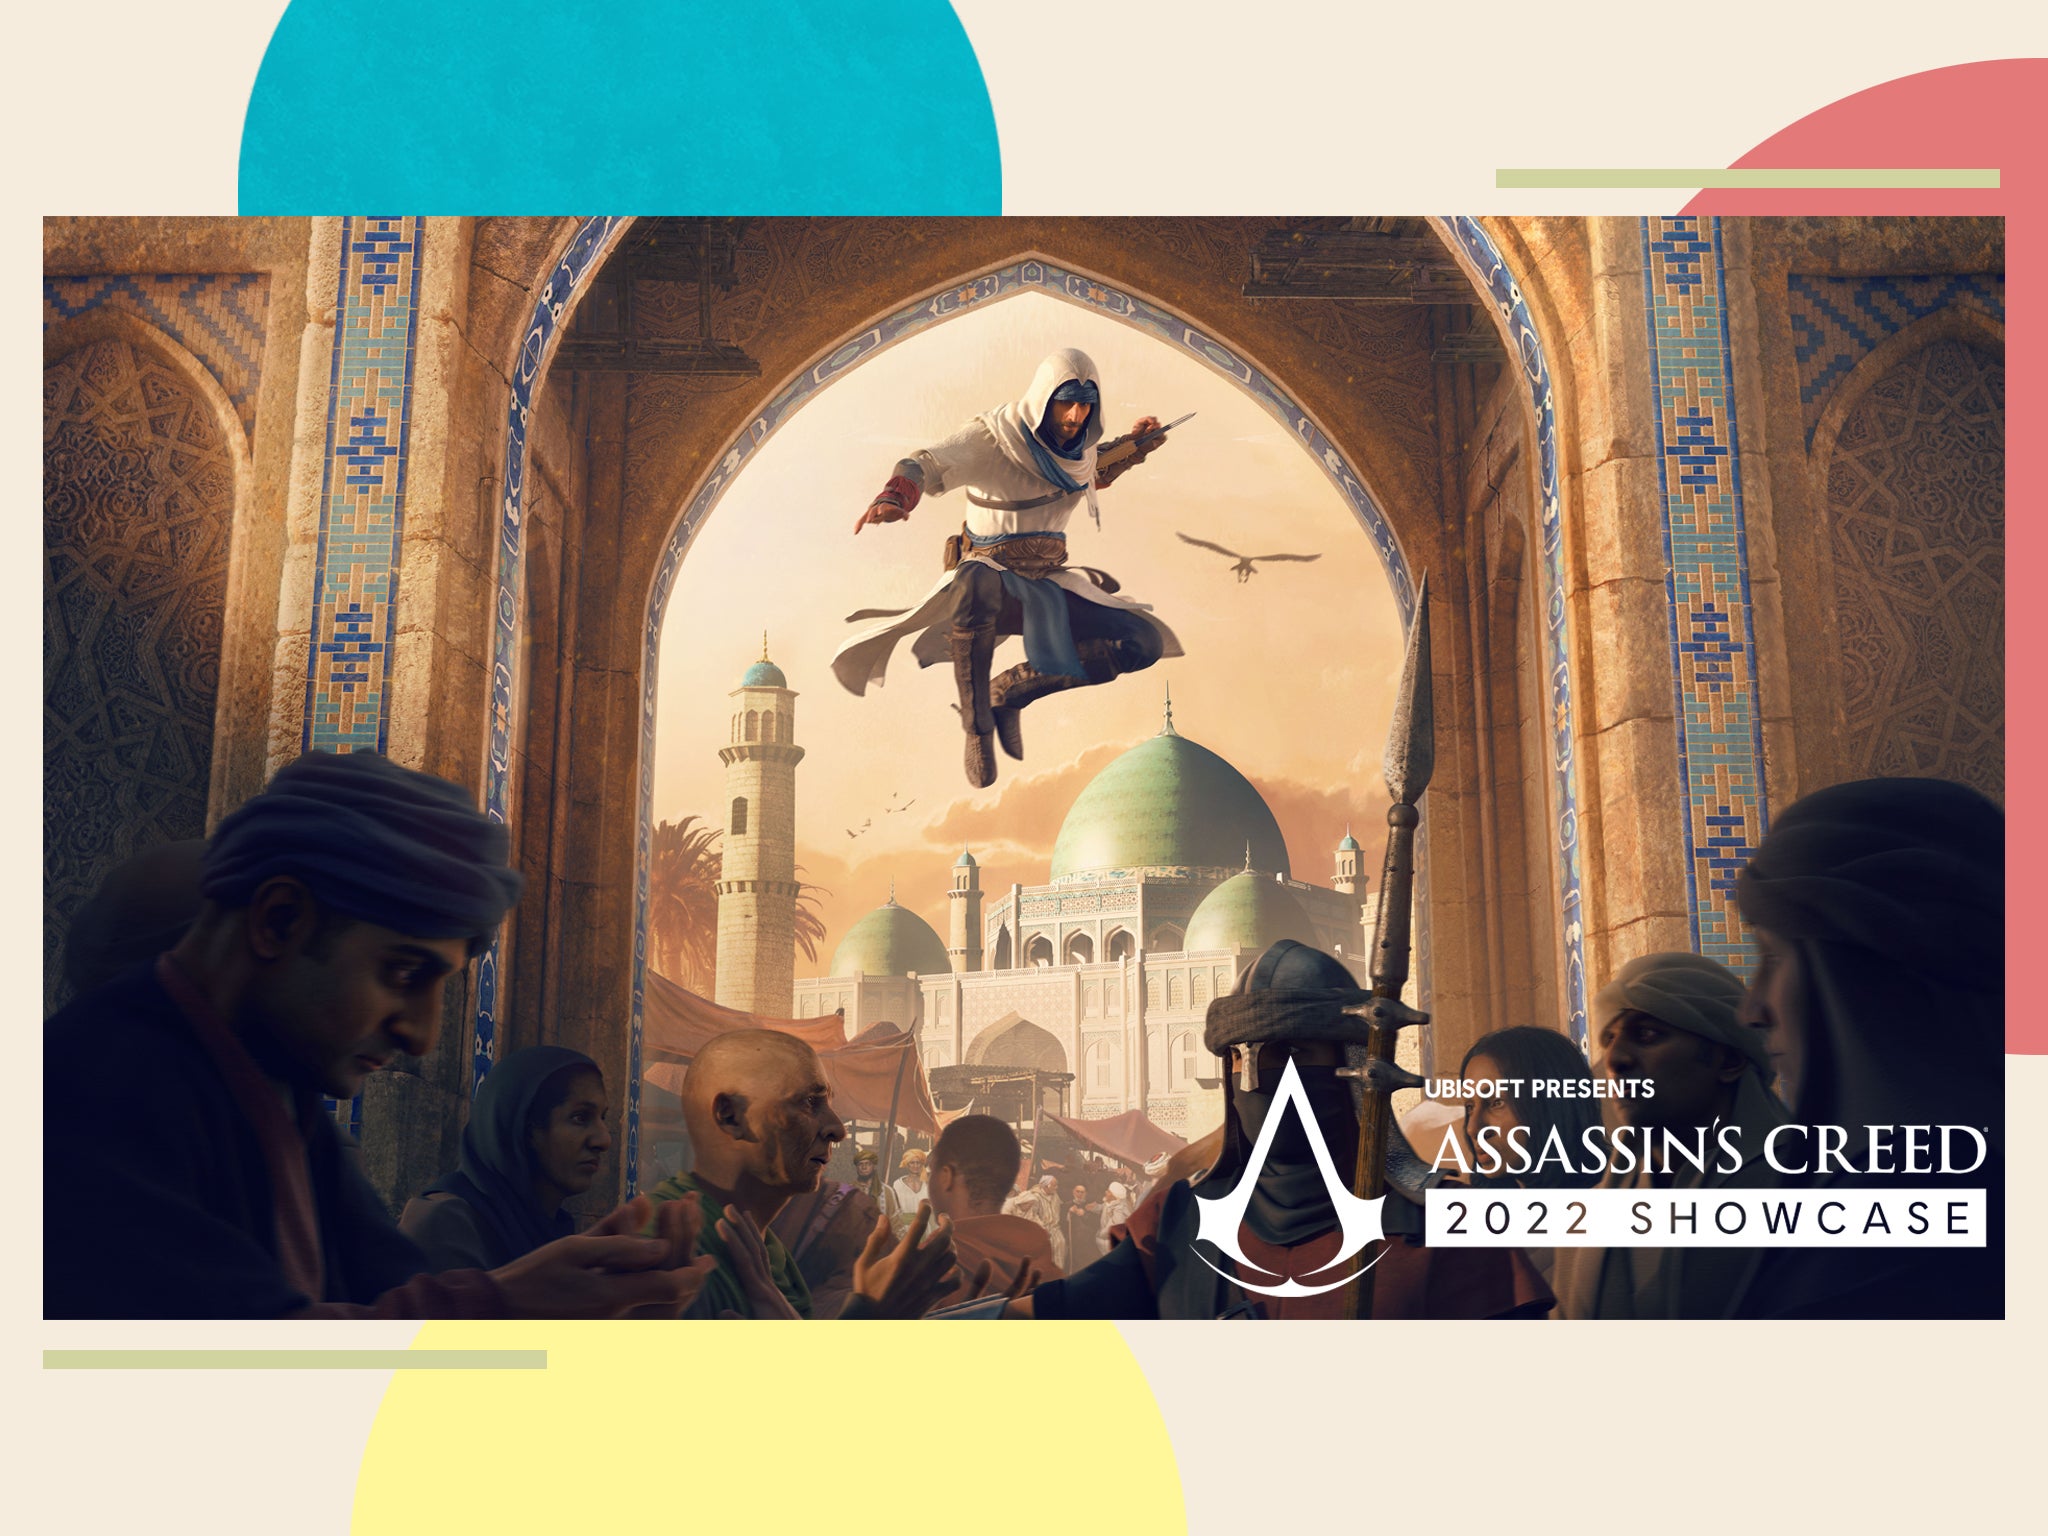 Assassin's Creed Mirage is coming out earlier than expected